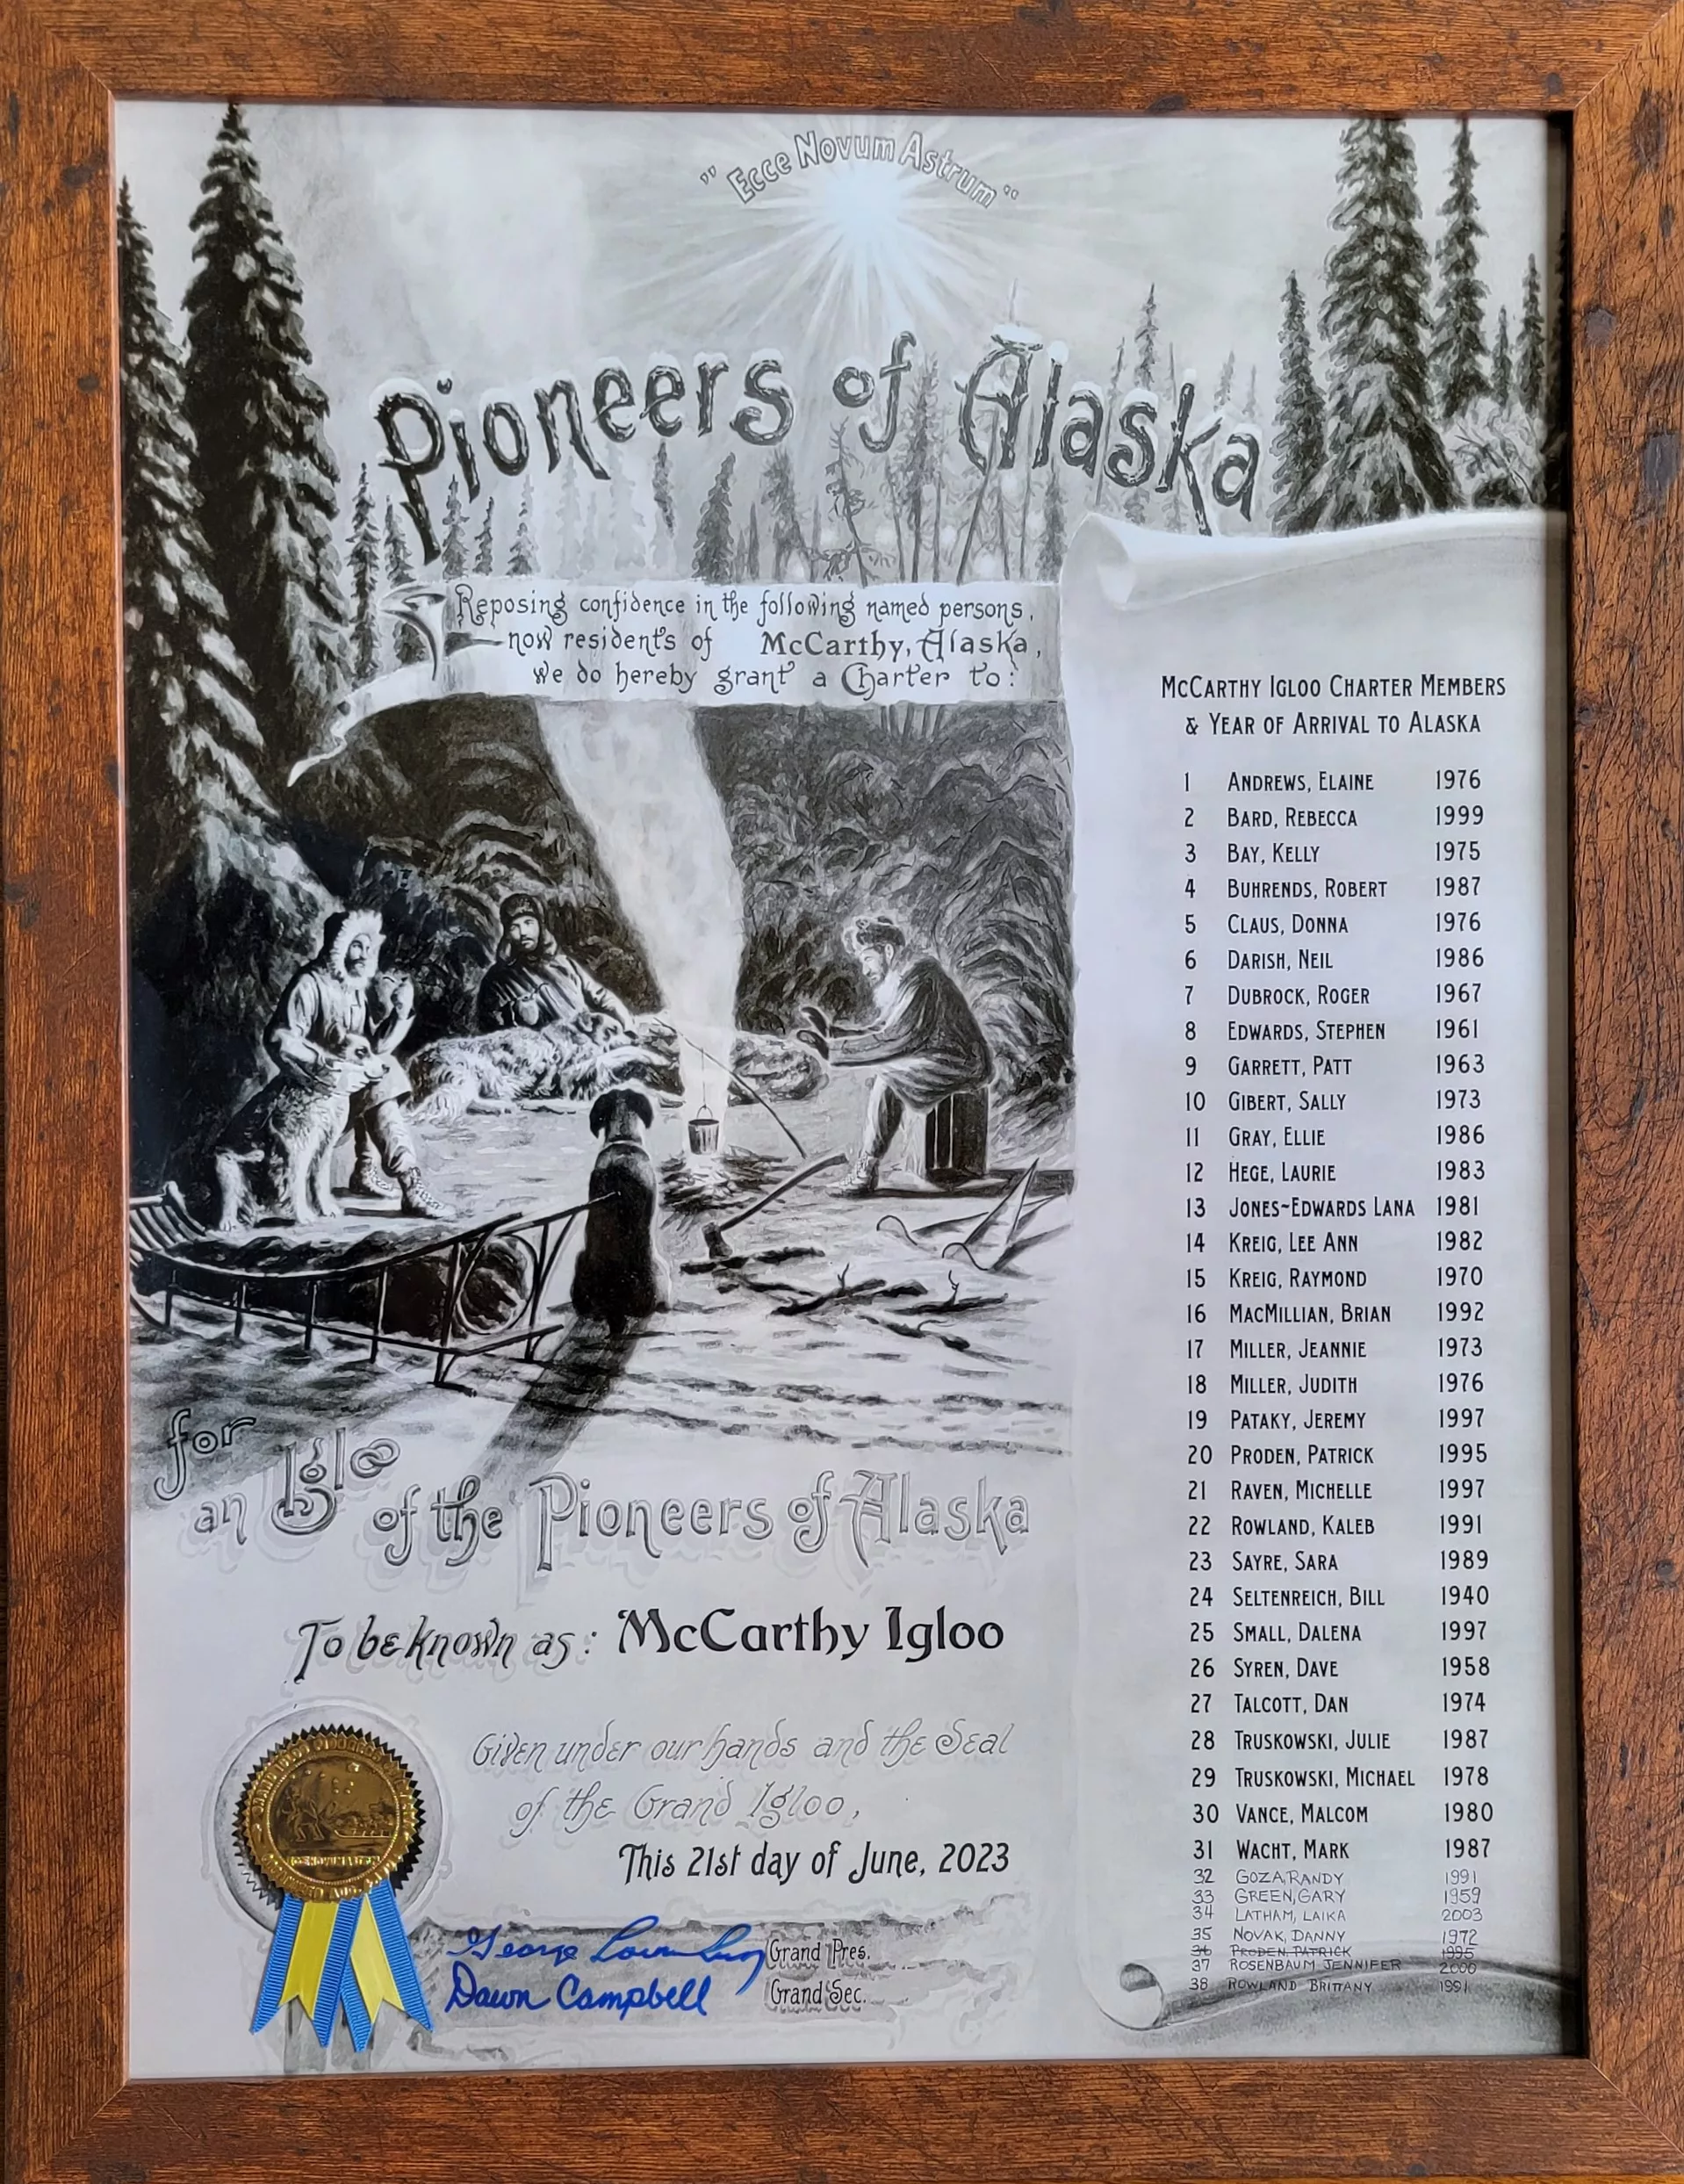 Image-of-the-Charter-Issued-by-the-Grand-Igloo-of-the-Pioneers-of-Alaska-for-the-McCarthy-Igloo